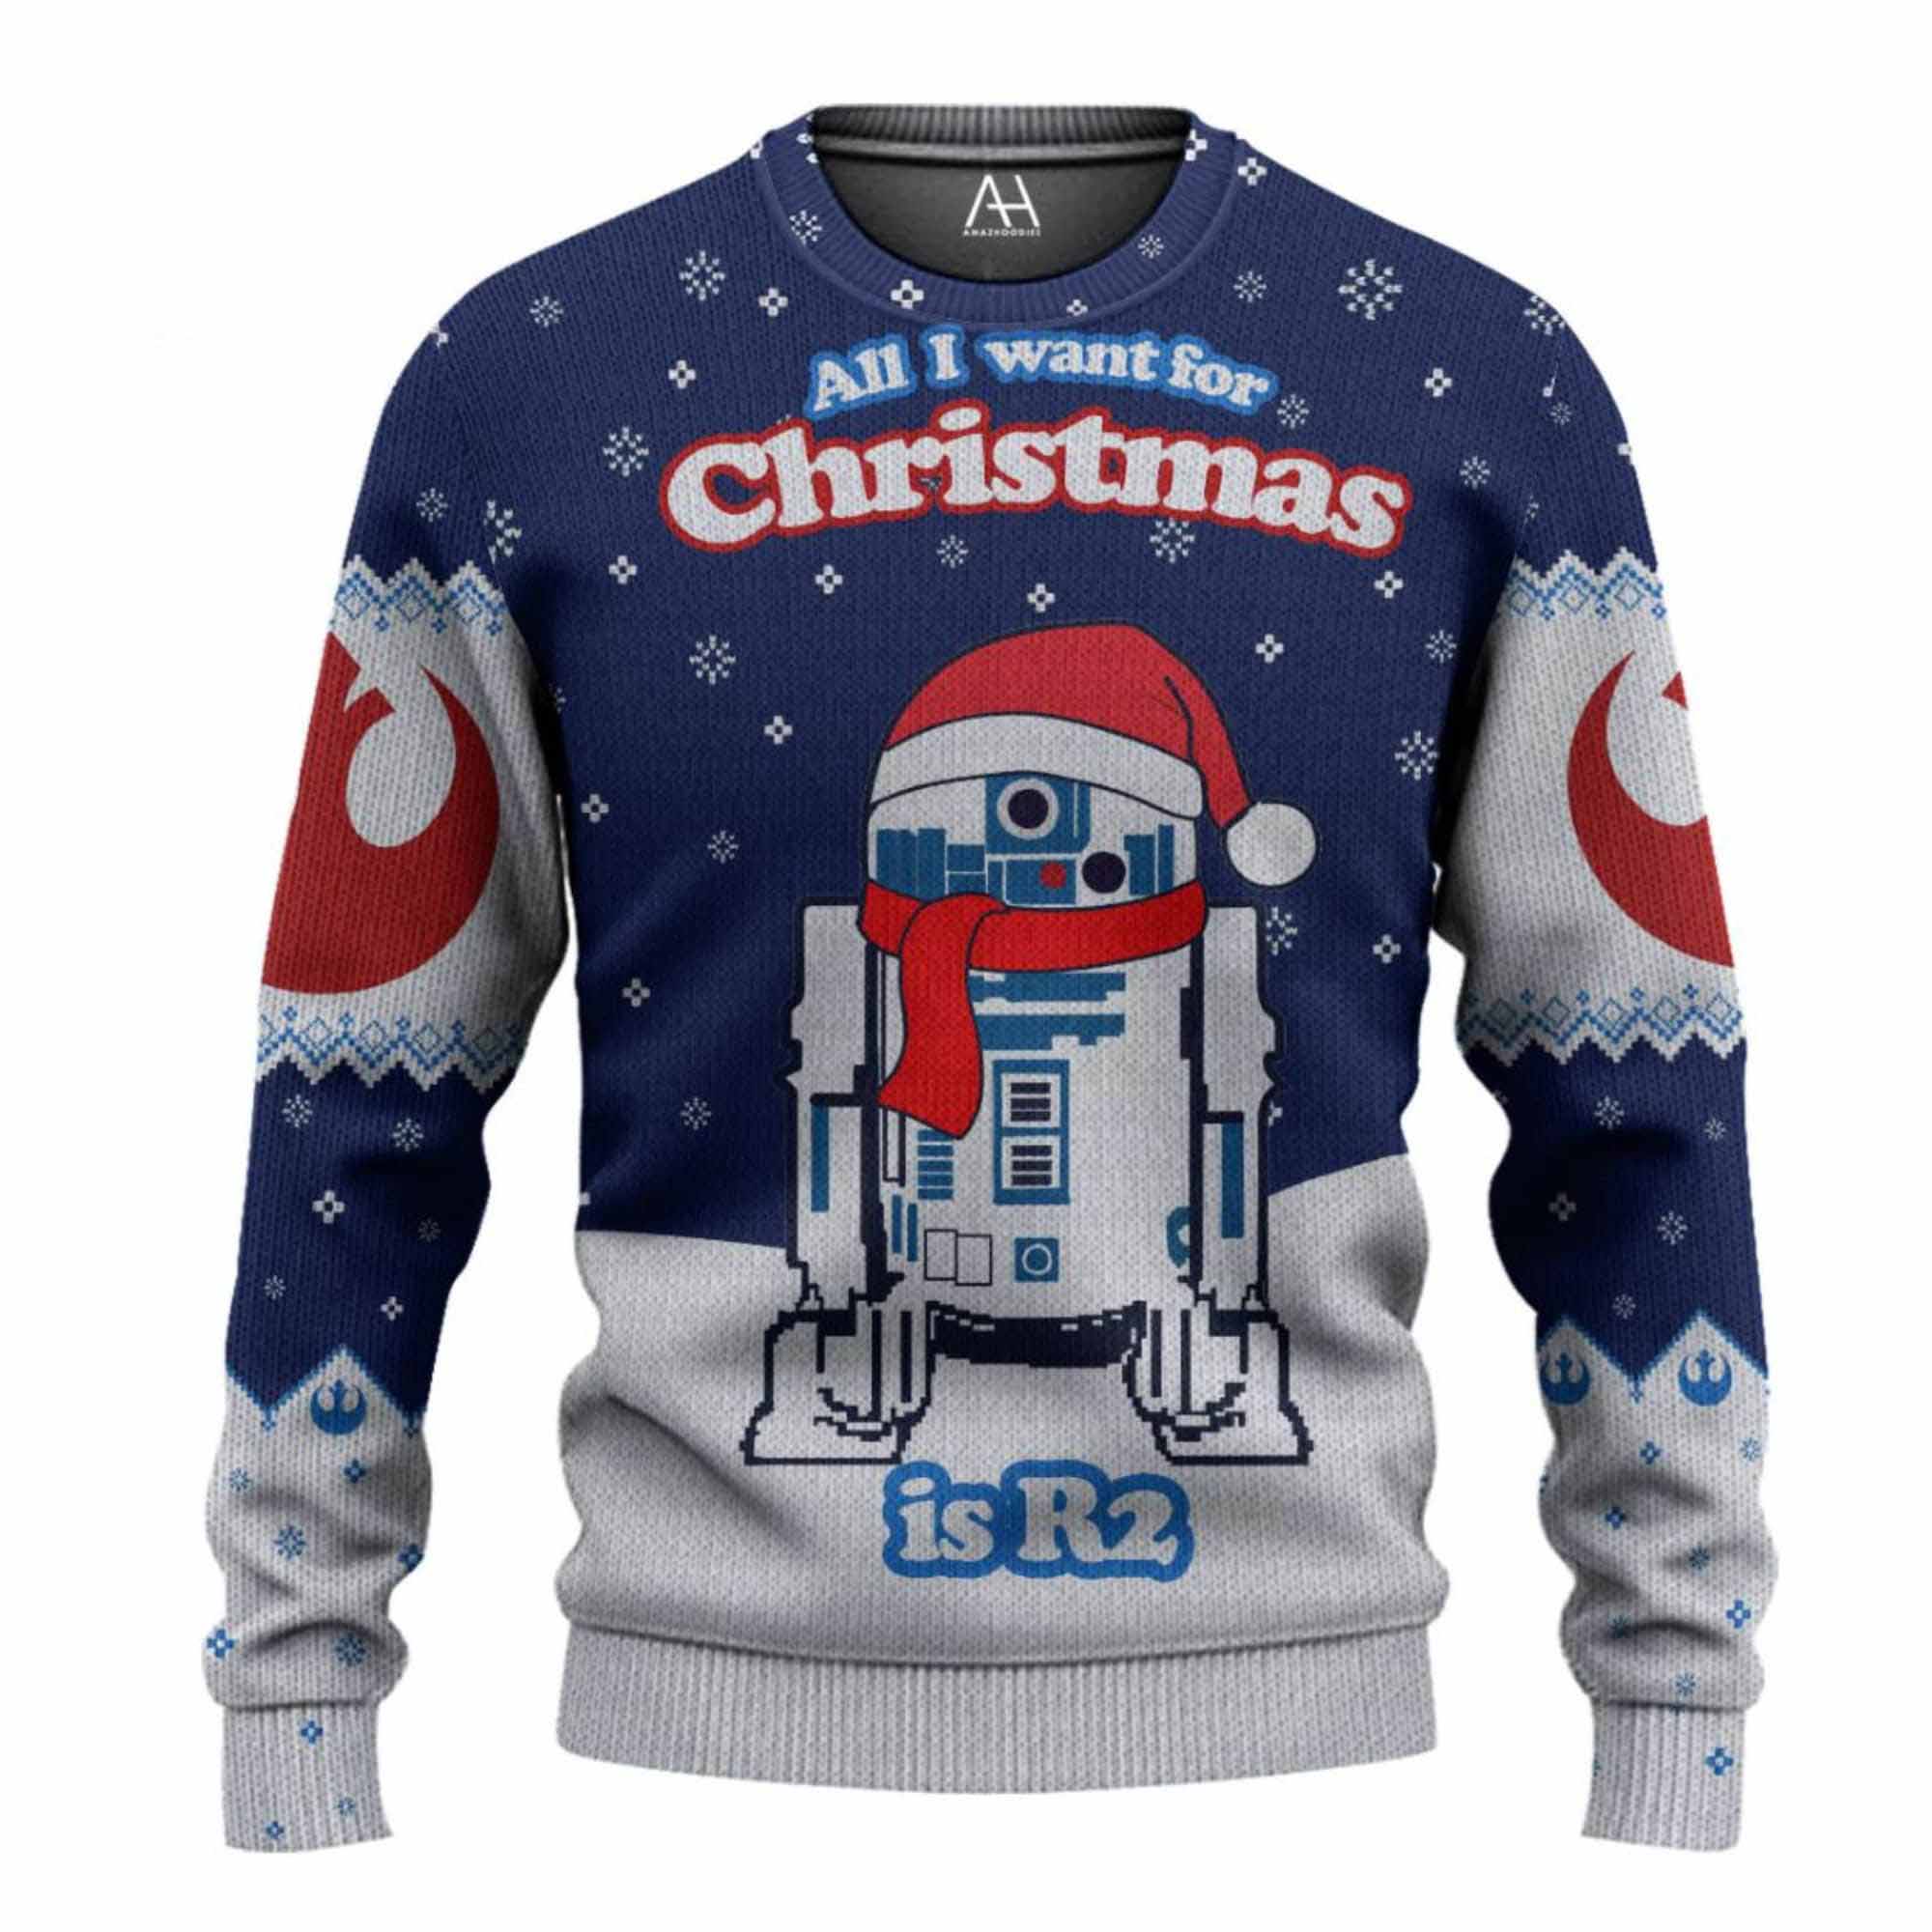 All I Want For Christmas Is R2 Ugly Christmas Sweater